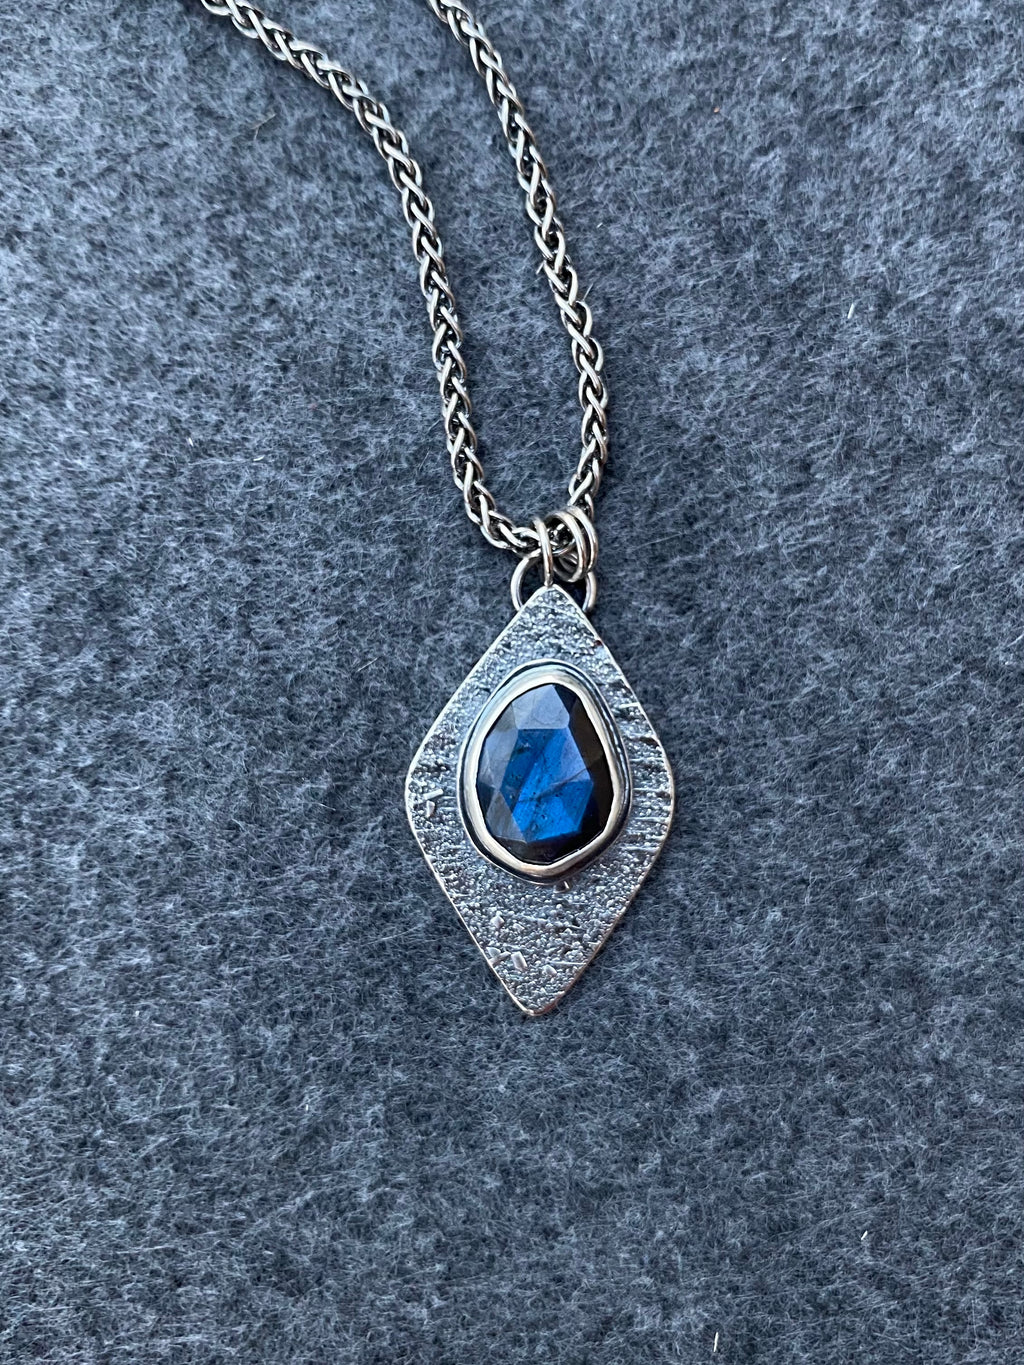 Stardust Pendant Necklace with Labradorite and Sterling Silver